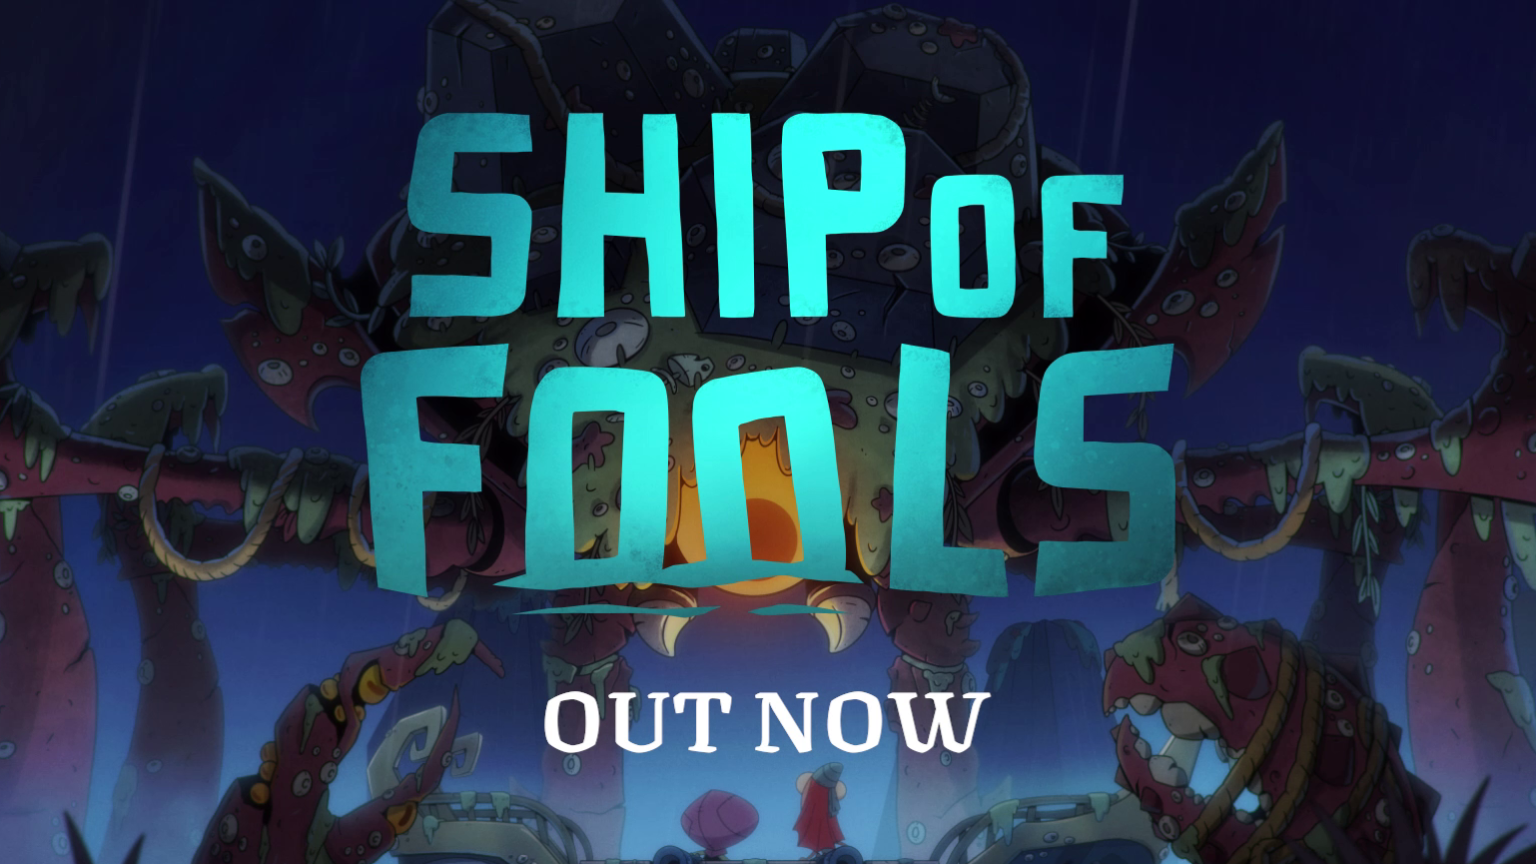 Ship Of Fools Is Out Now On Pc And Consoles Team17 Digital Ltd The Spirit Of Independent Games